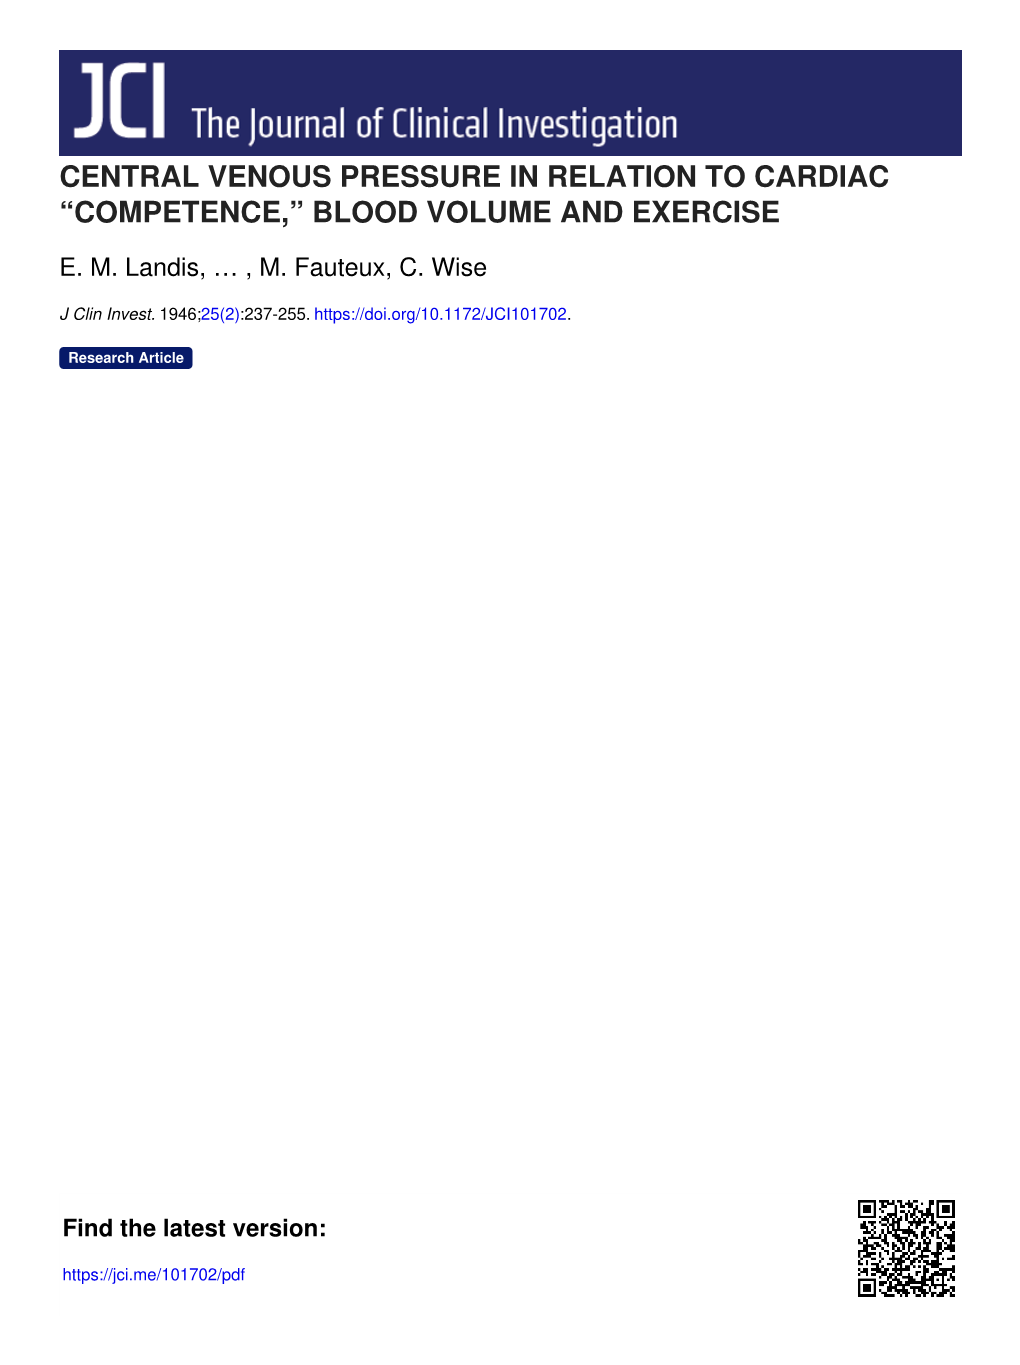 Central Venous Pressure in Relation to Cardiac “Competence,” Blood Volume and Exercise